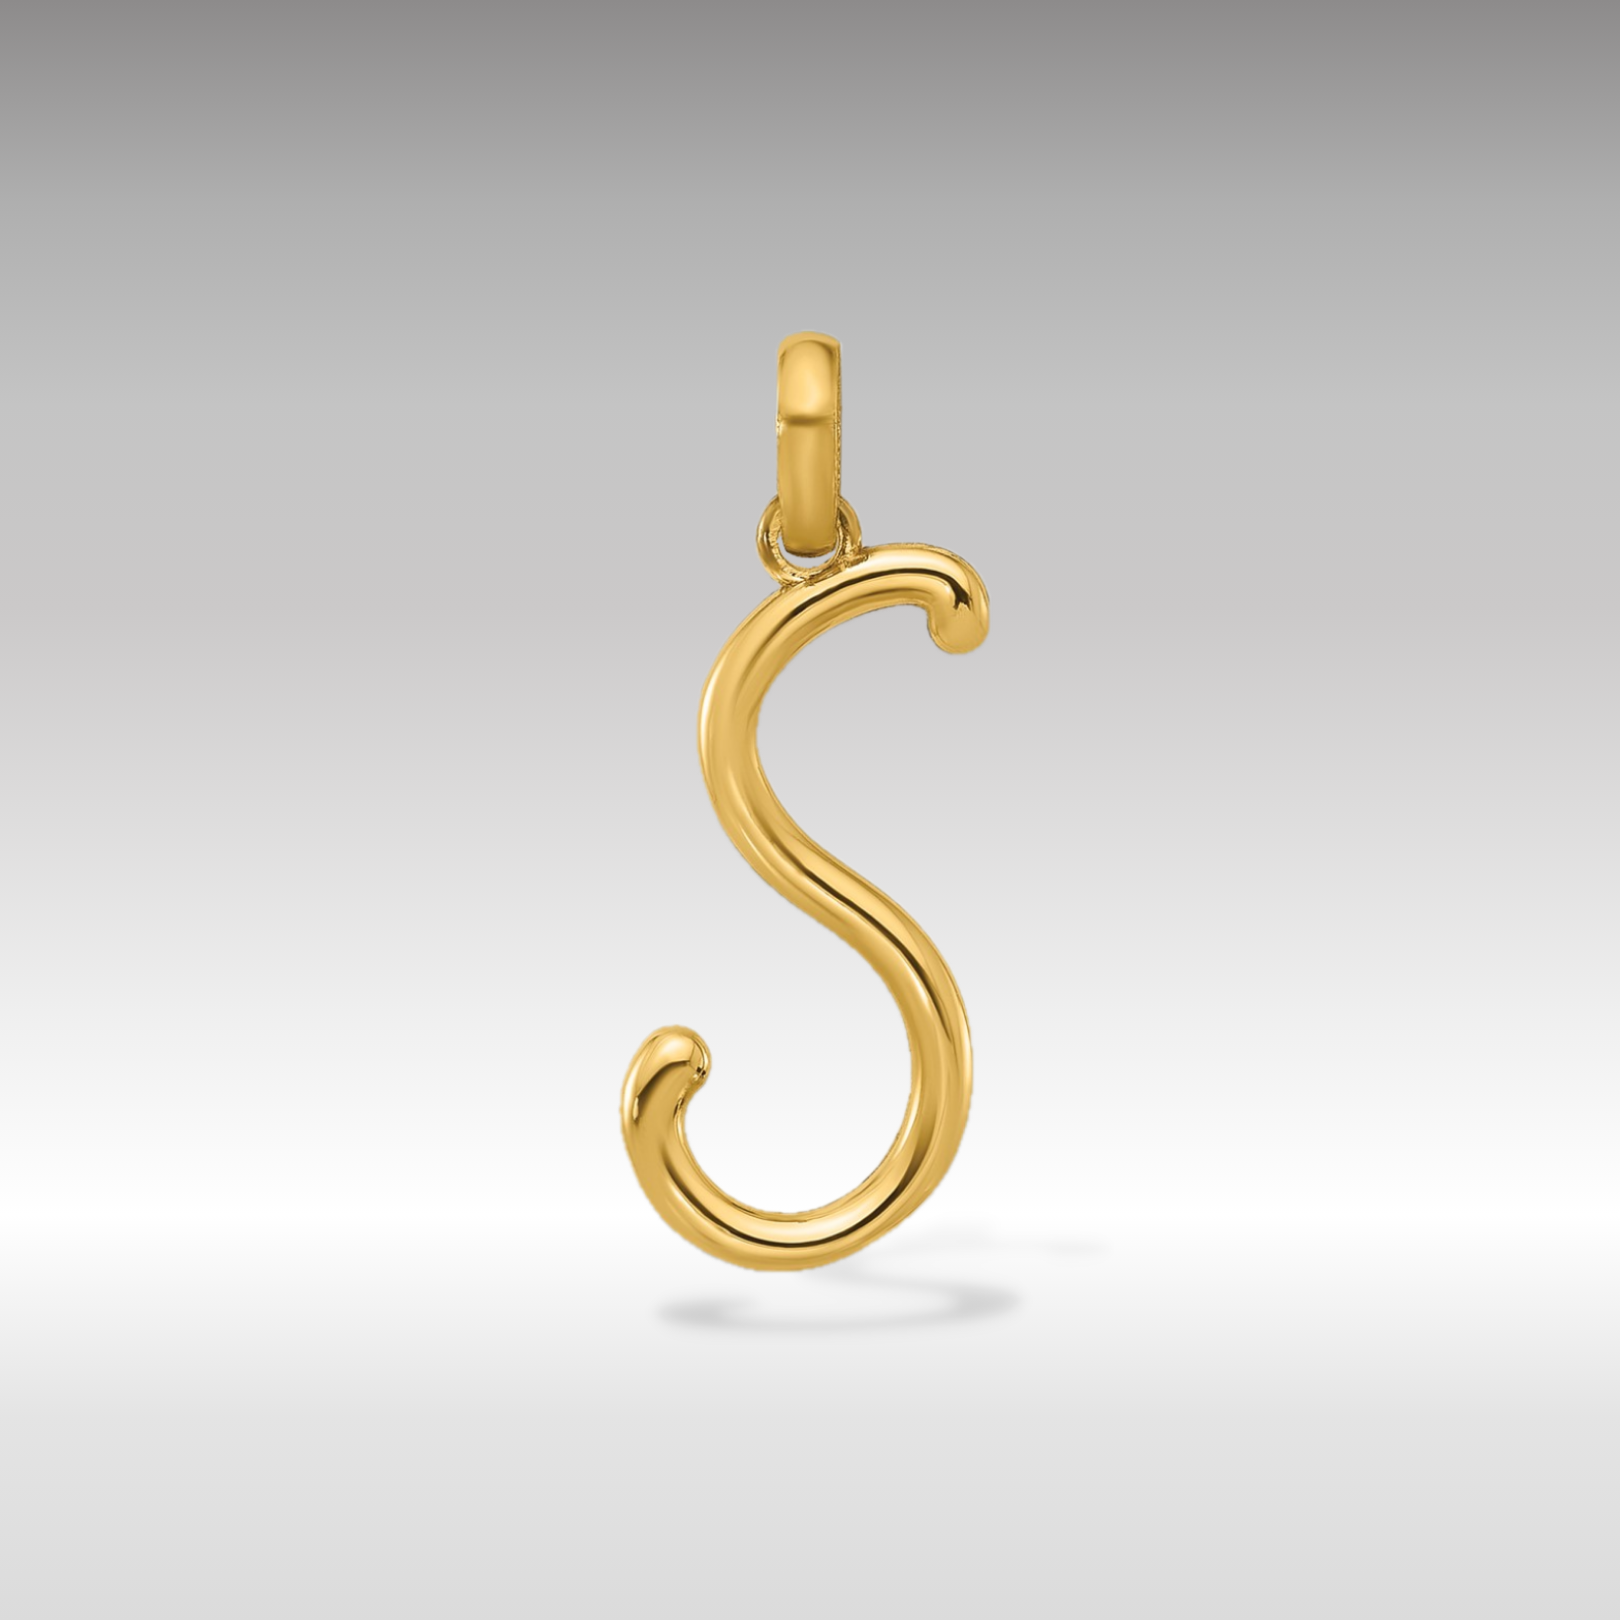 14K Gold Fancy Letter 'S' Charm Pendant - Charlie & Co. Jewelry